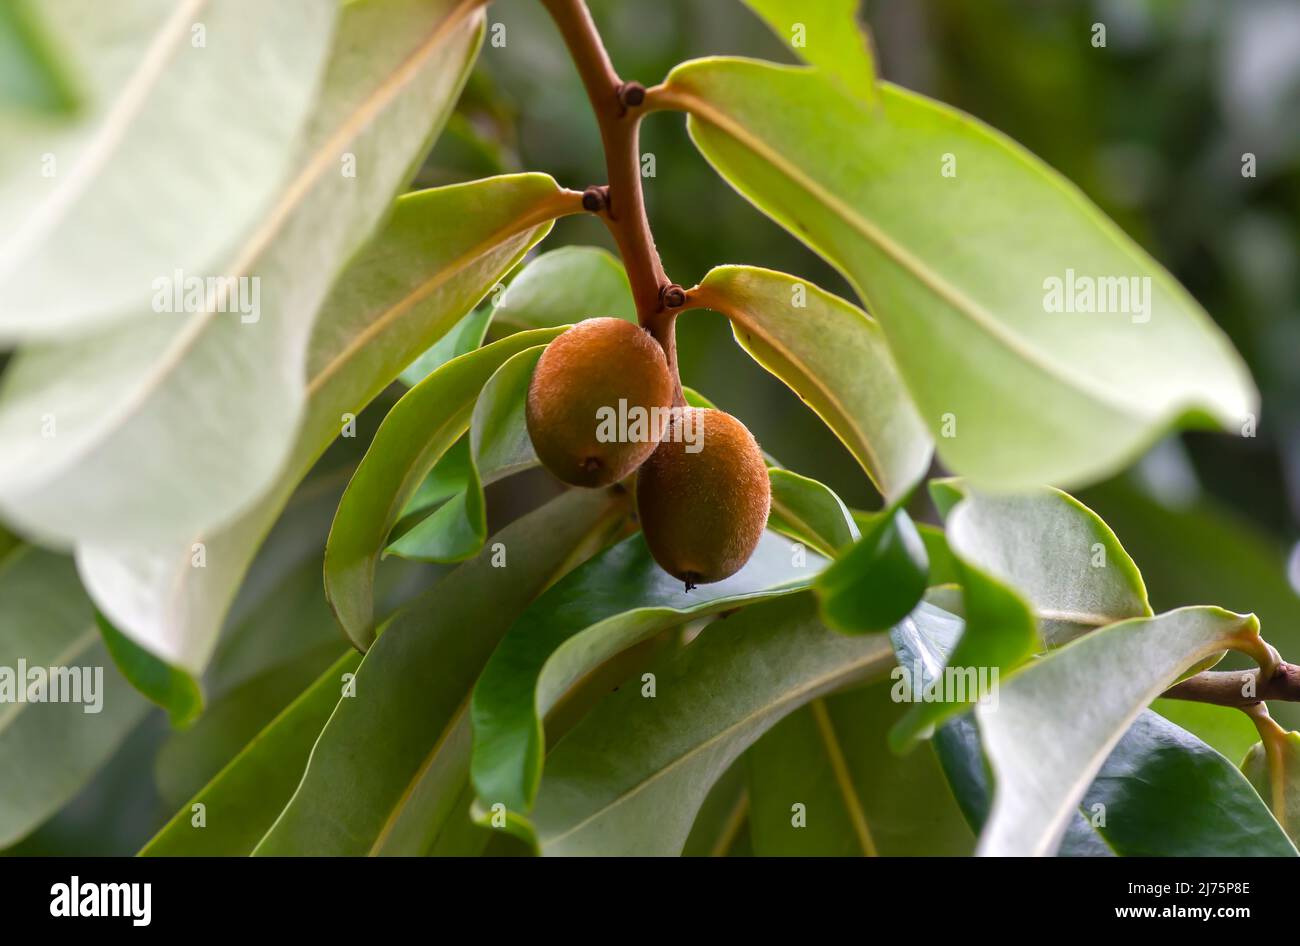 Indonesian dark wood, Ebony (Diospyros celebica) green leaves and seeds, selected focus Stock Photo